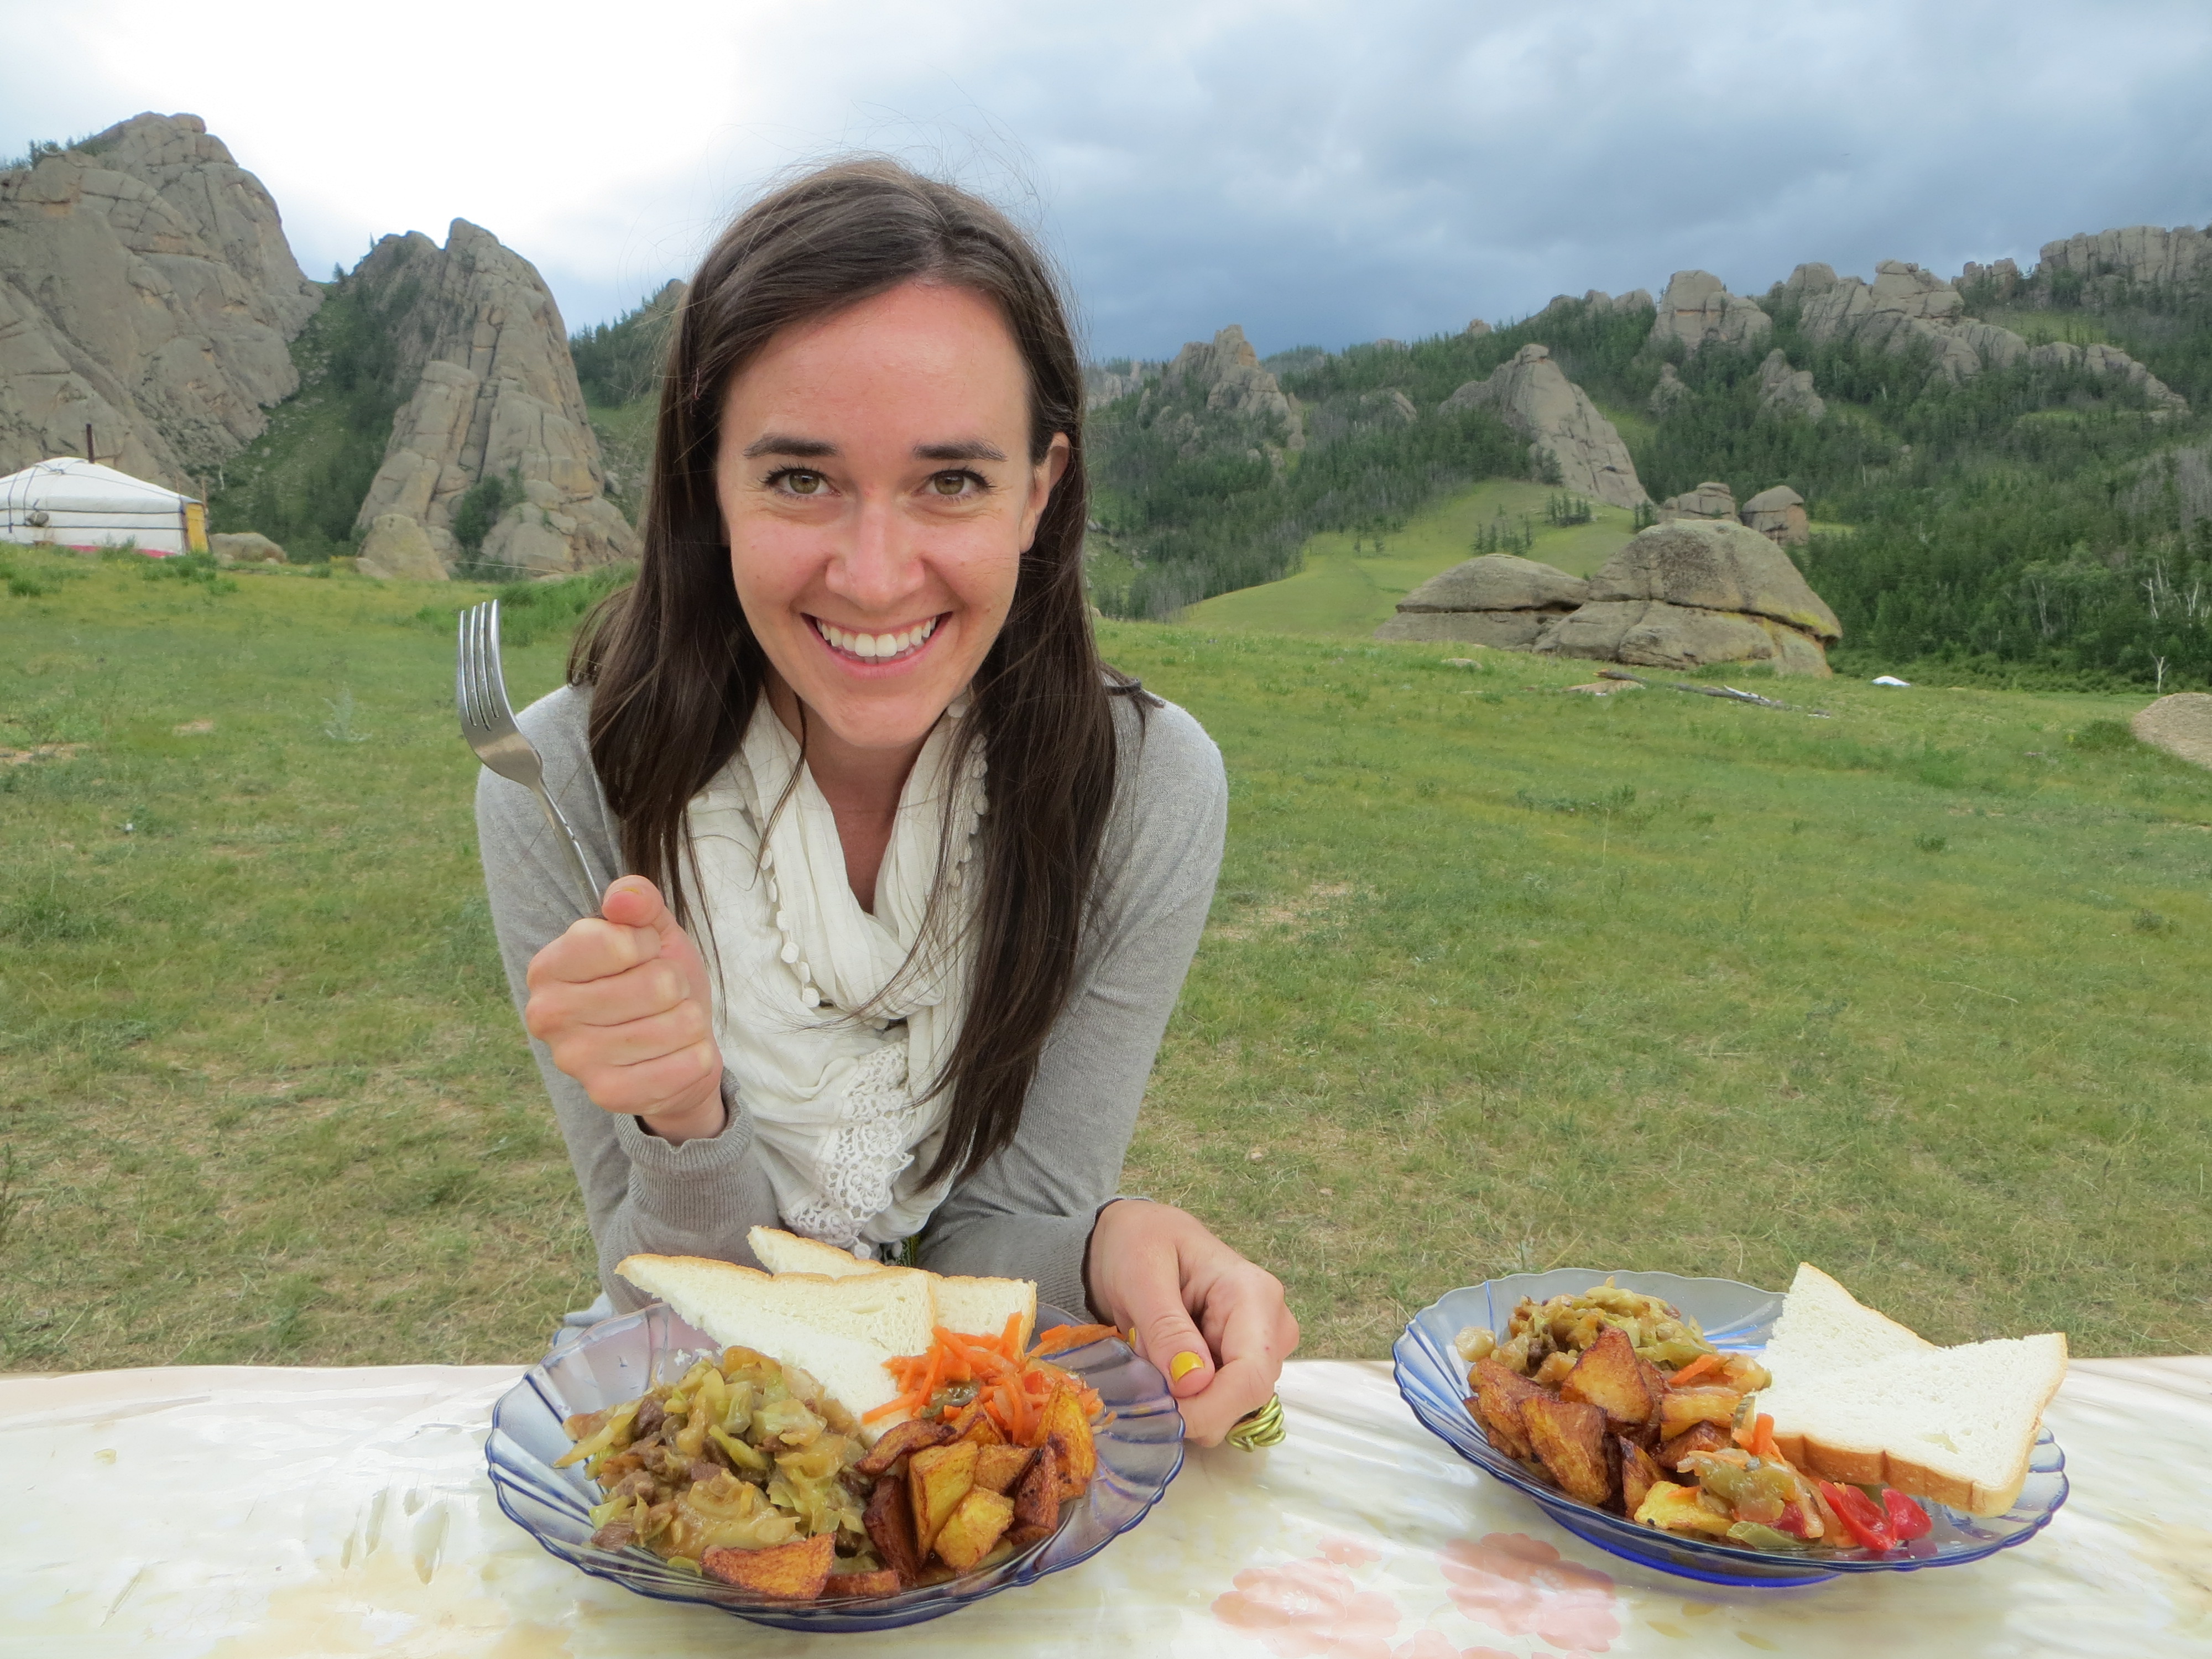 The scenery was stunning in Mongolia. But the food? Not so much!